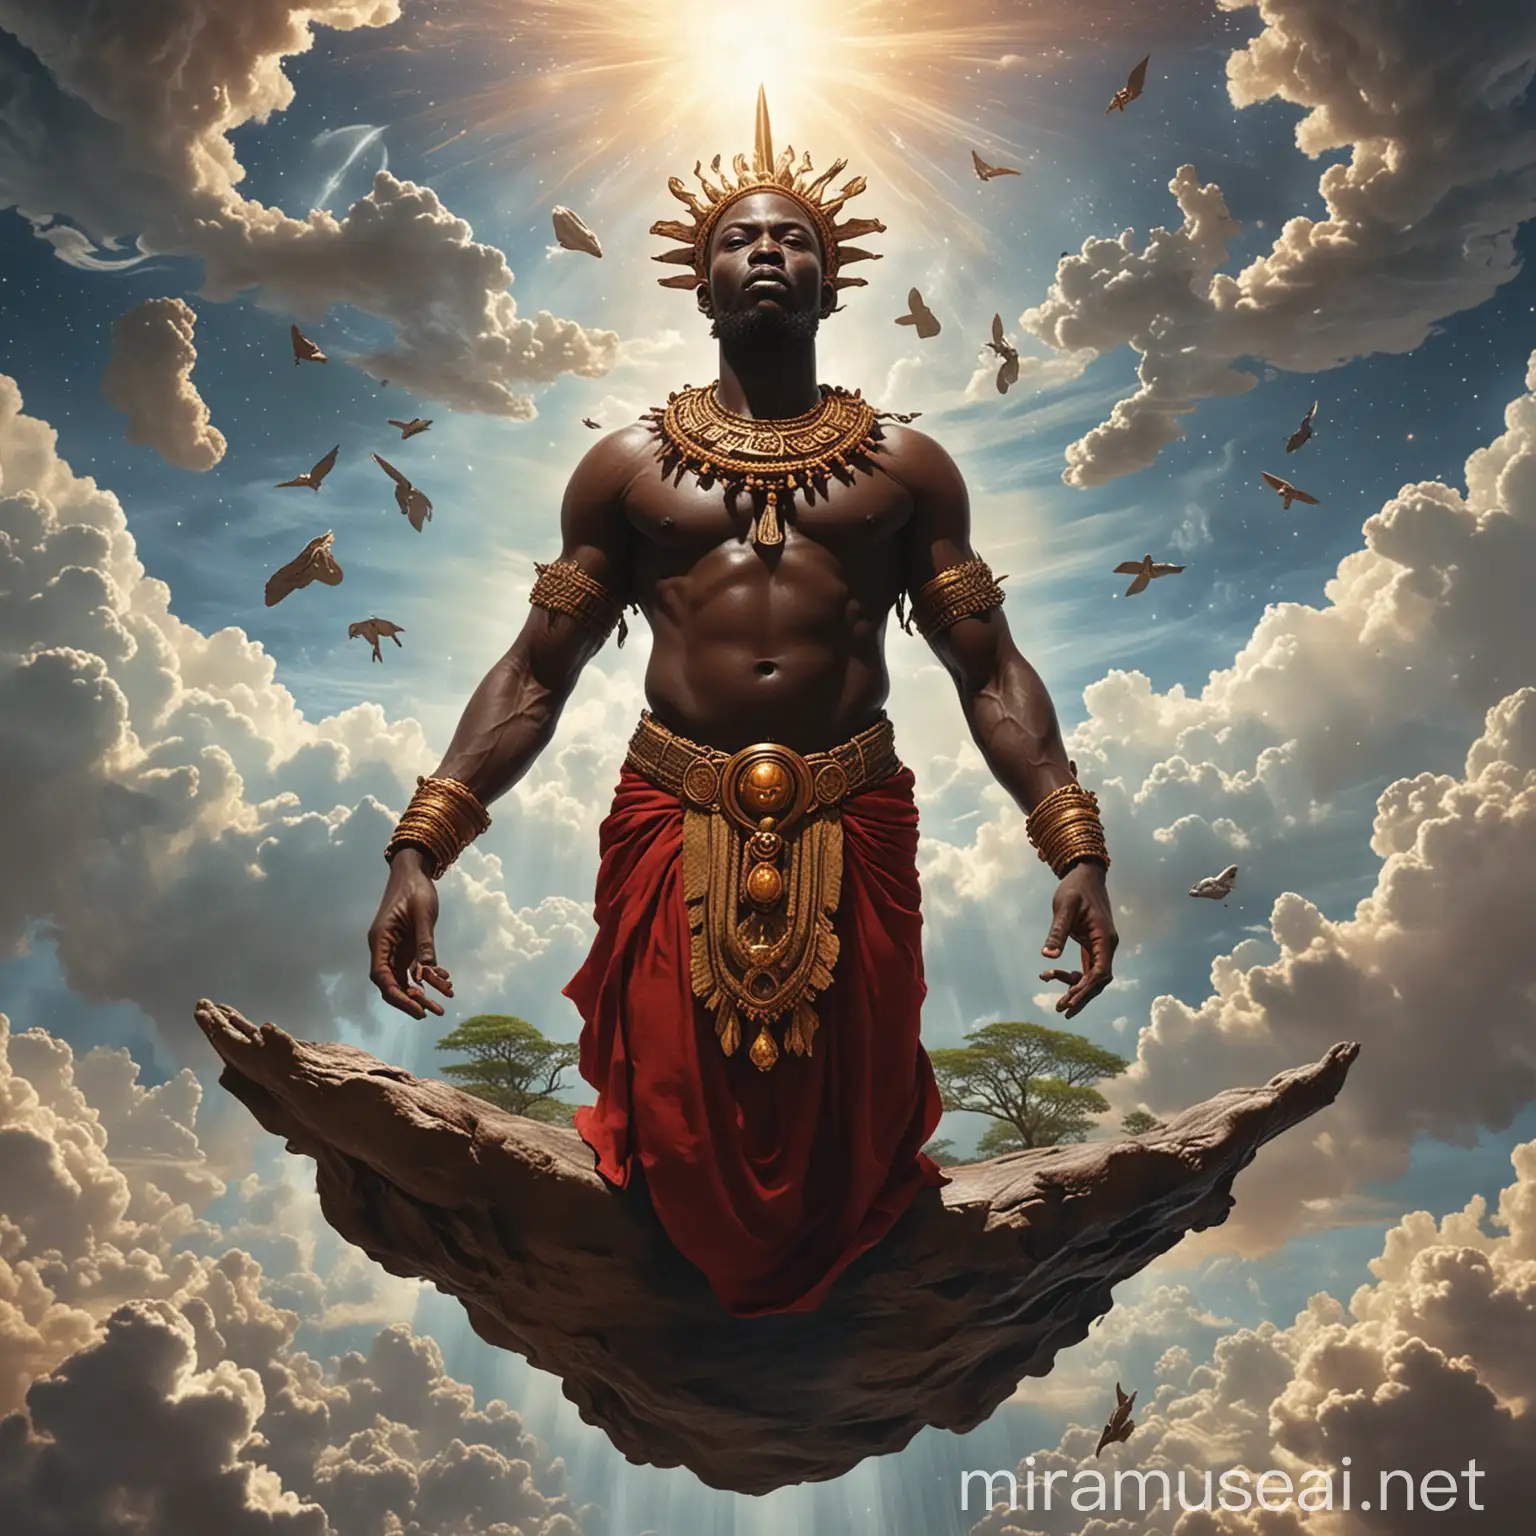 African God floating in a primordial world